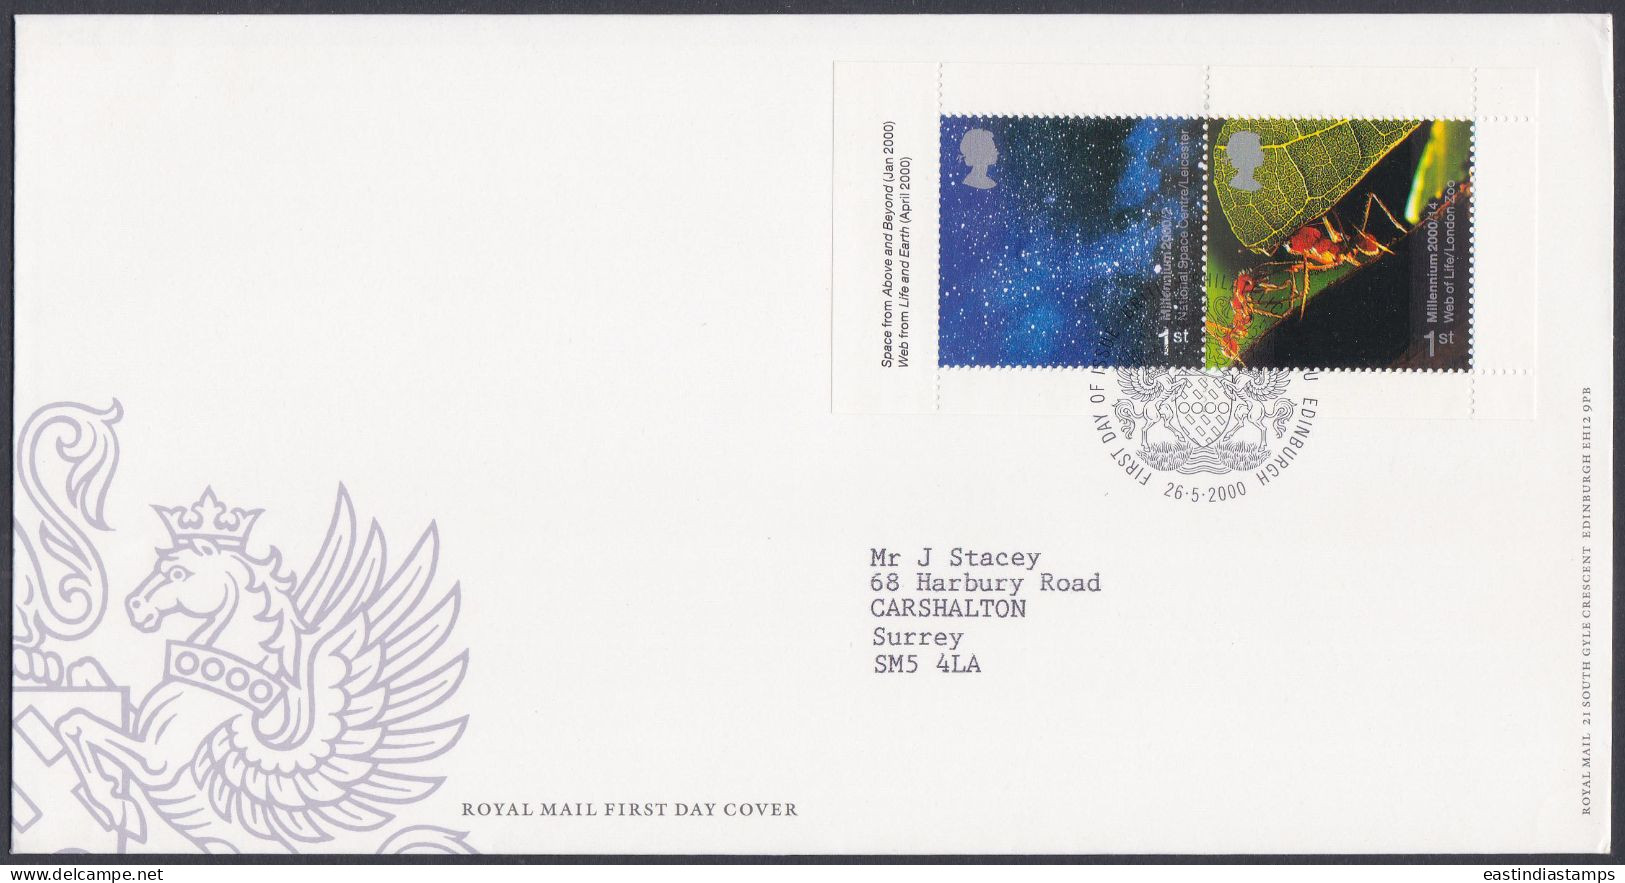 GB Great Britain 2000 FDC Space, Stars, Ant, Insect, London Zoo, Se-tenant, Pictorial Postmark, First Day Cover - Lettres & Documents